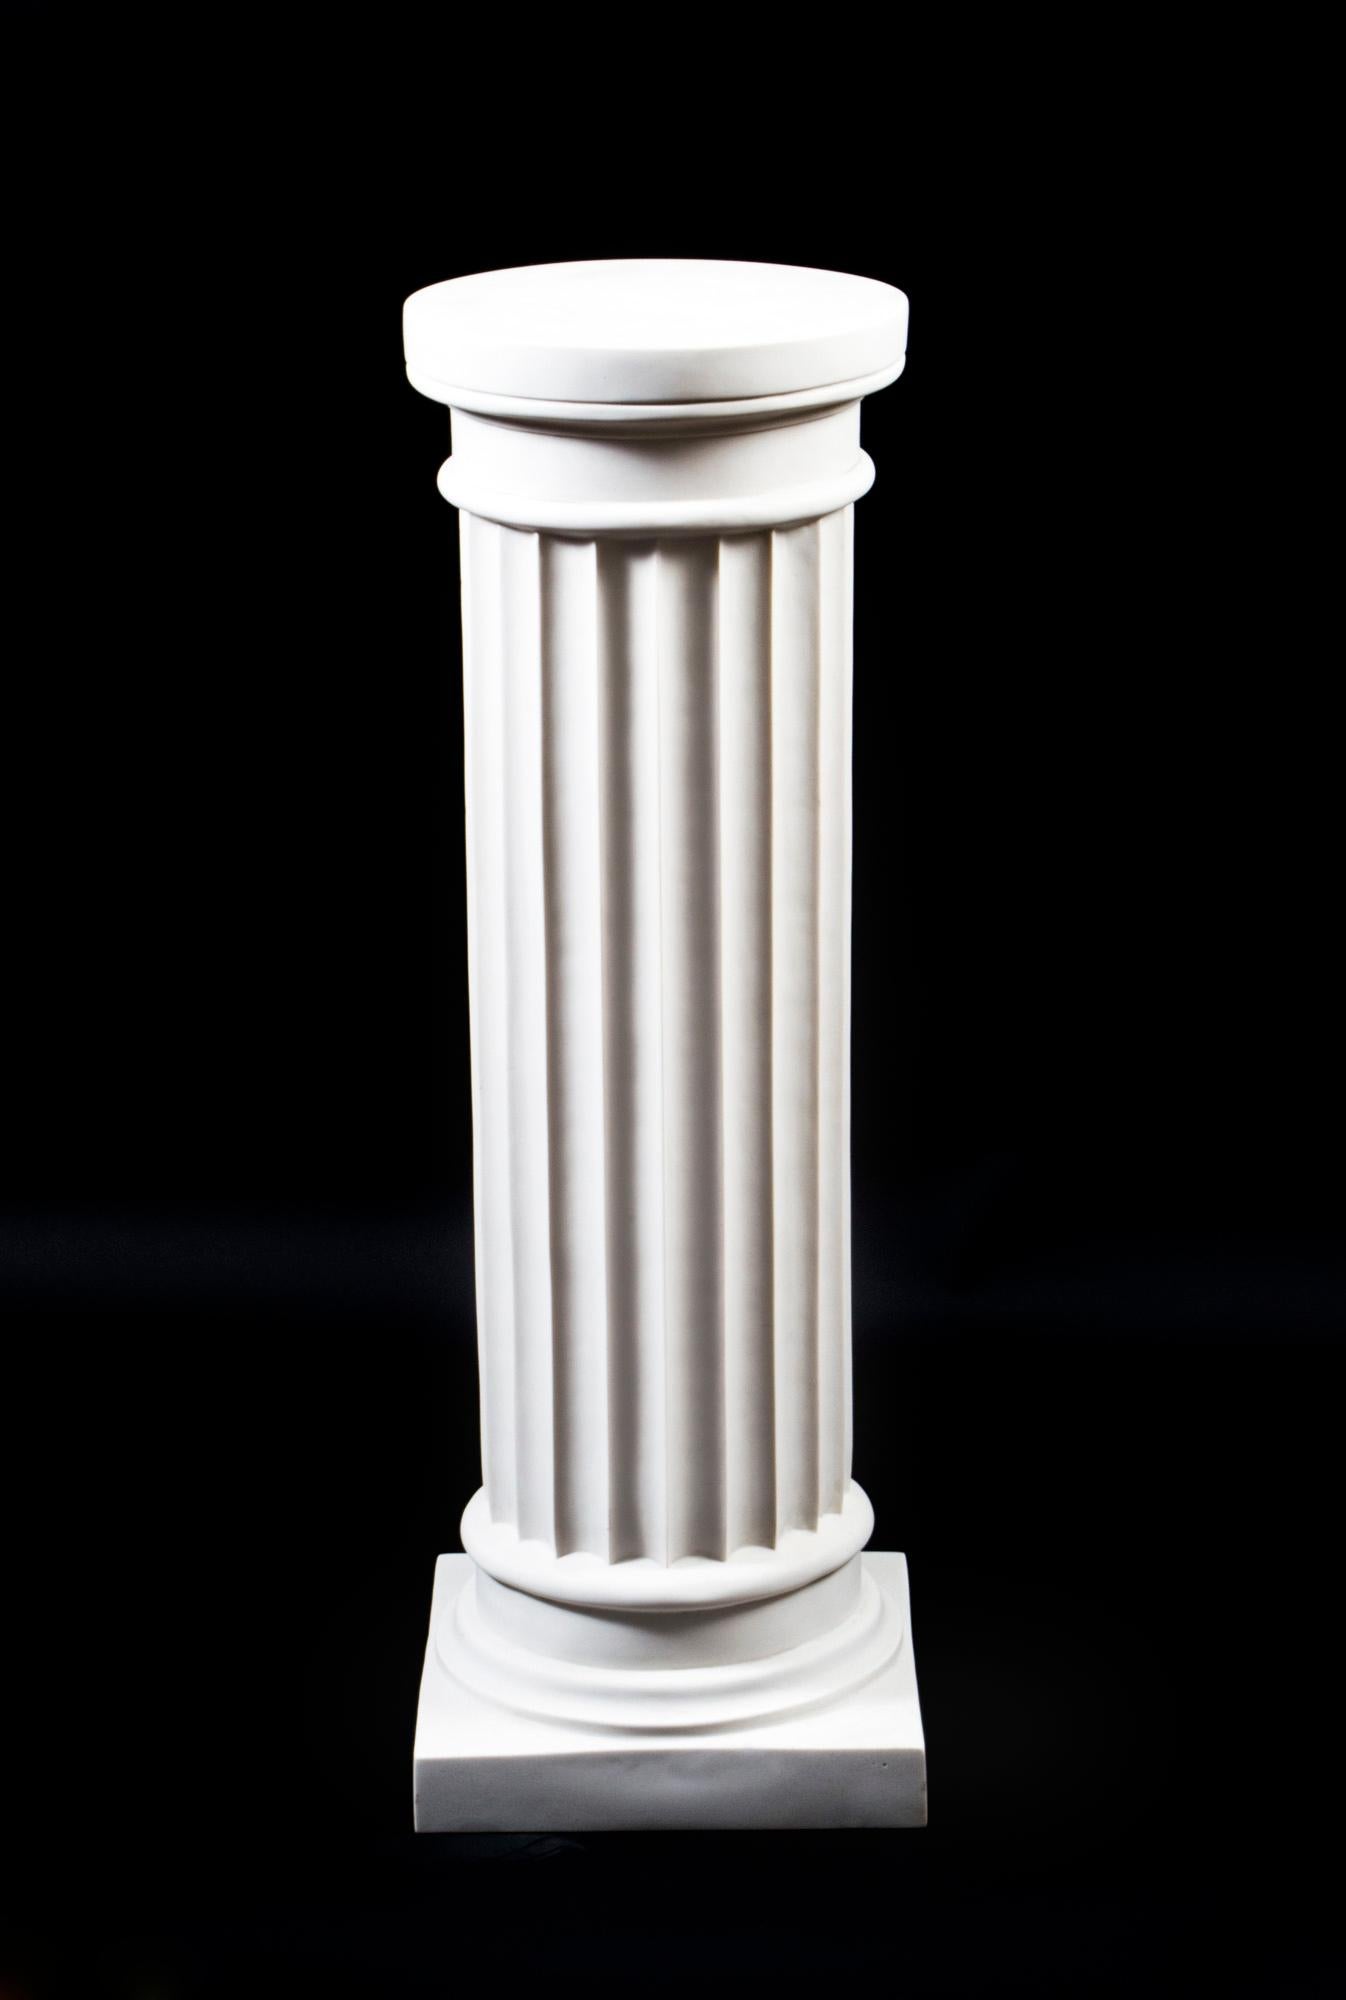 A elegant pedestal in the form of a classical ancient Greek Doric column dating from the last quarter of the 20th century.

The column has a fluted body with an plain and undecorated column capitals and tapers faintly larger in circumference